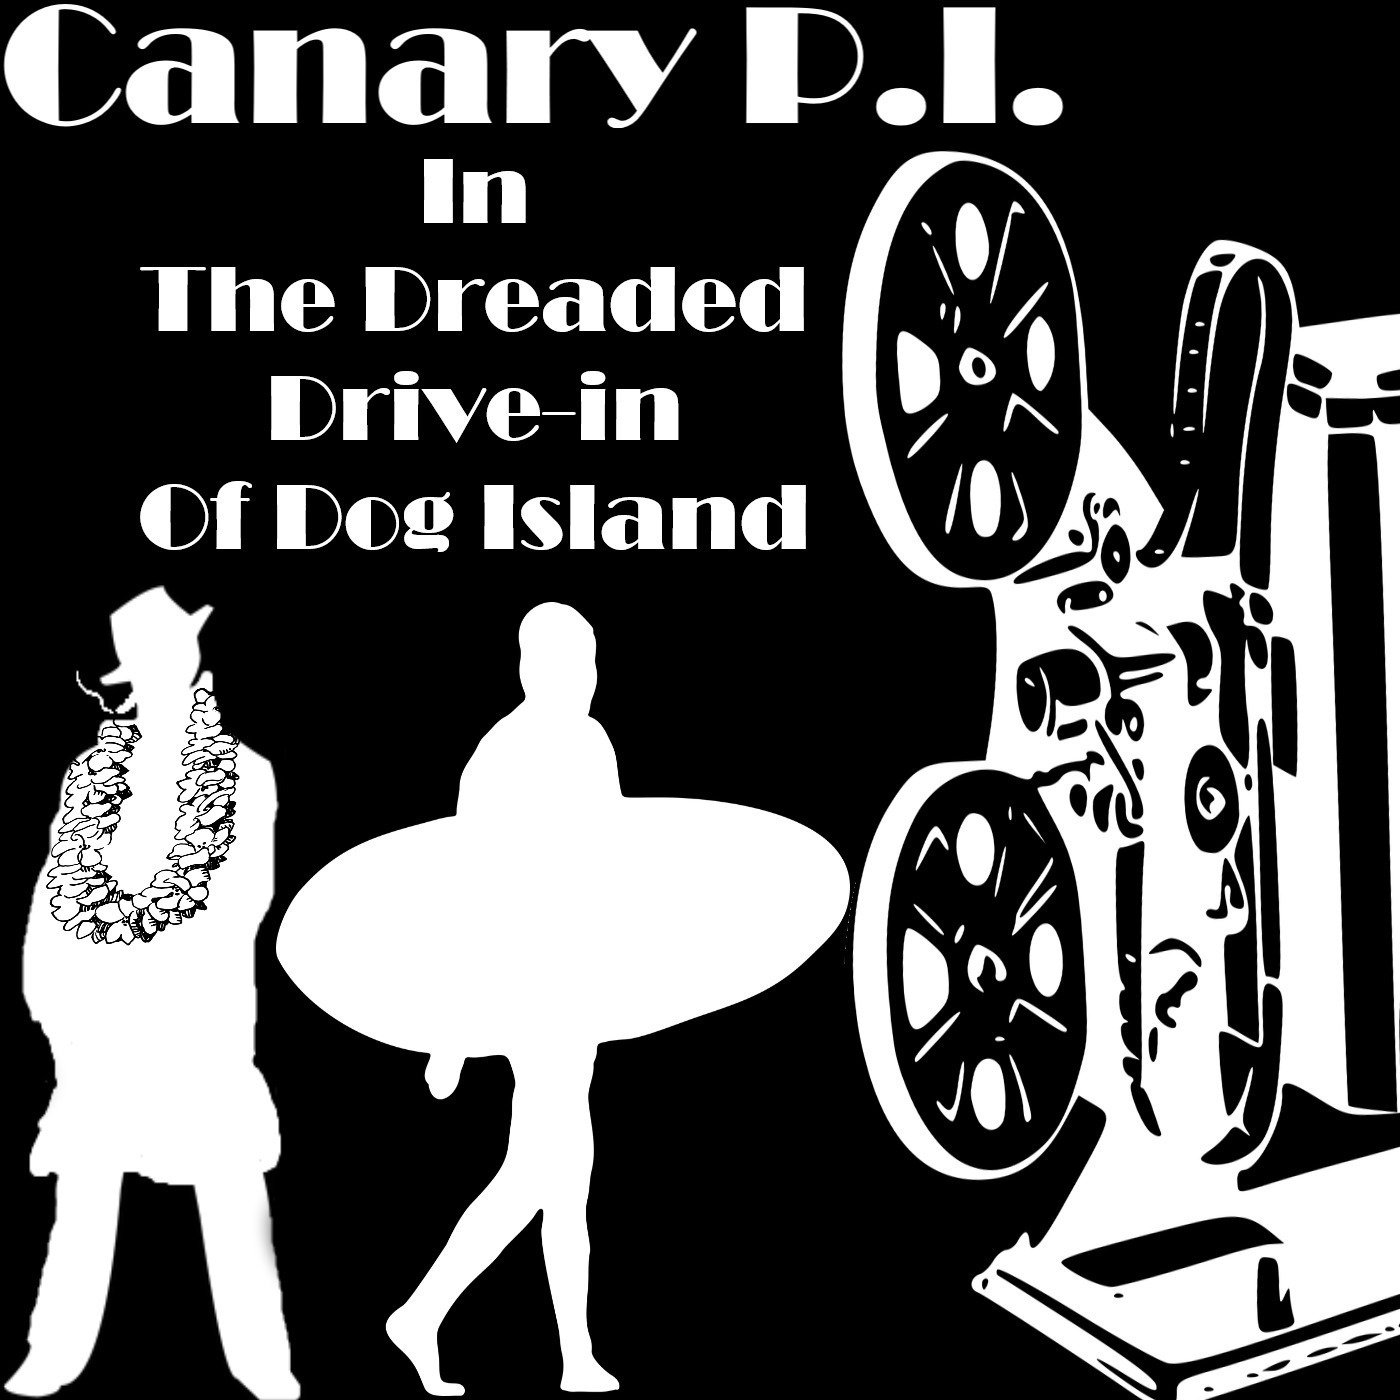 Madison On The Air & Canary P.I. Crossover Trailer! Coming Jan 1st